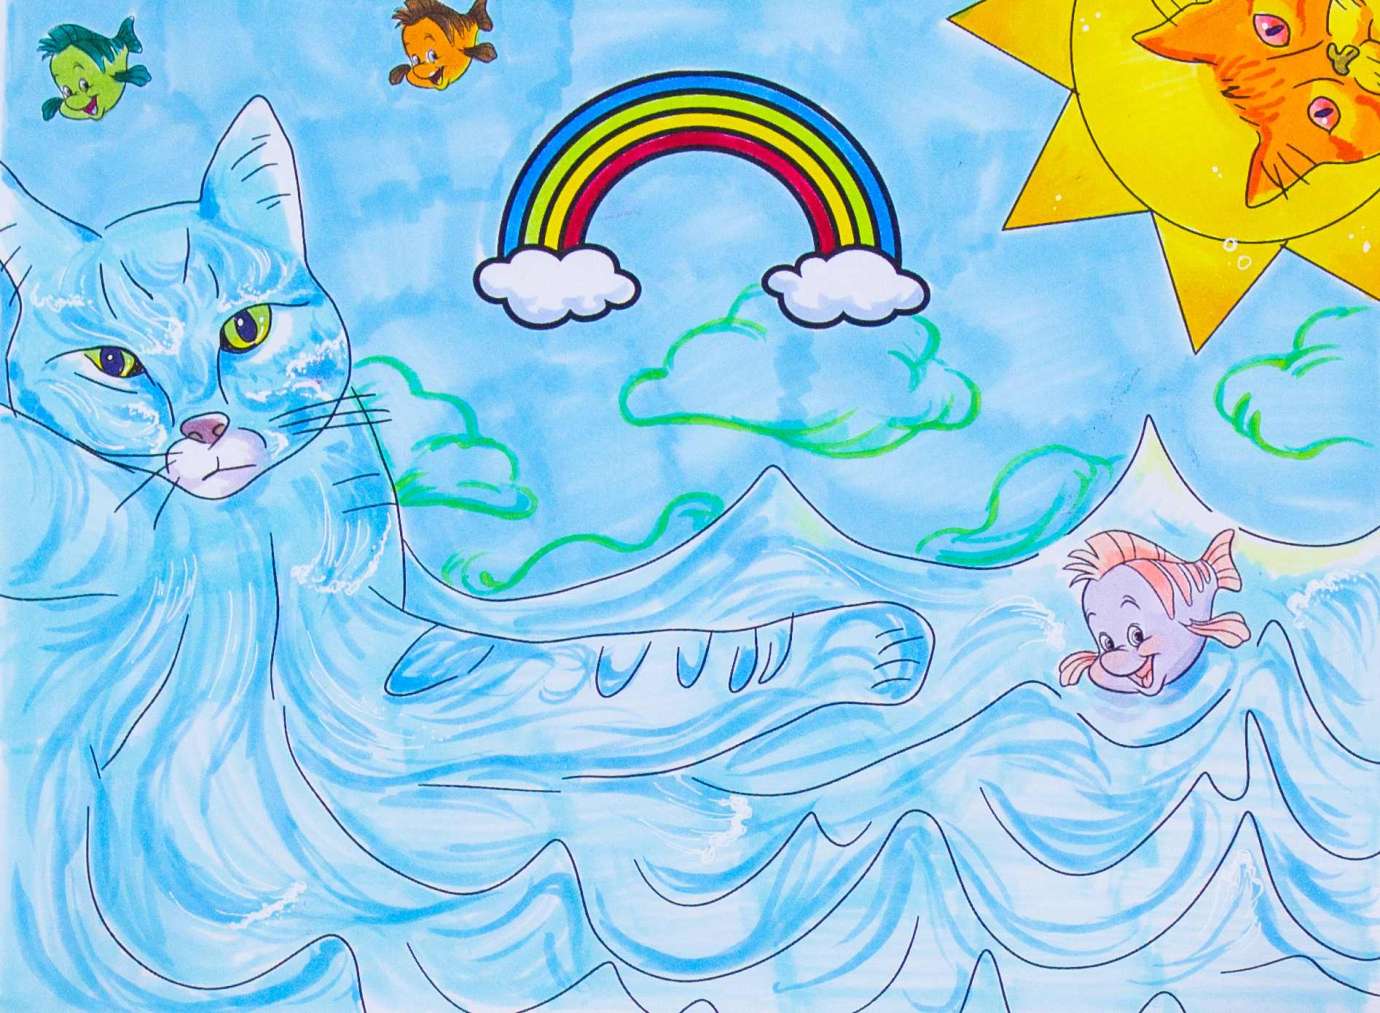 drawing of a rainbow stretching over an ocean filled with cats and flounder from The Little Mermaid. Looking over the ocean is a sun with a cat's face in it.